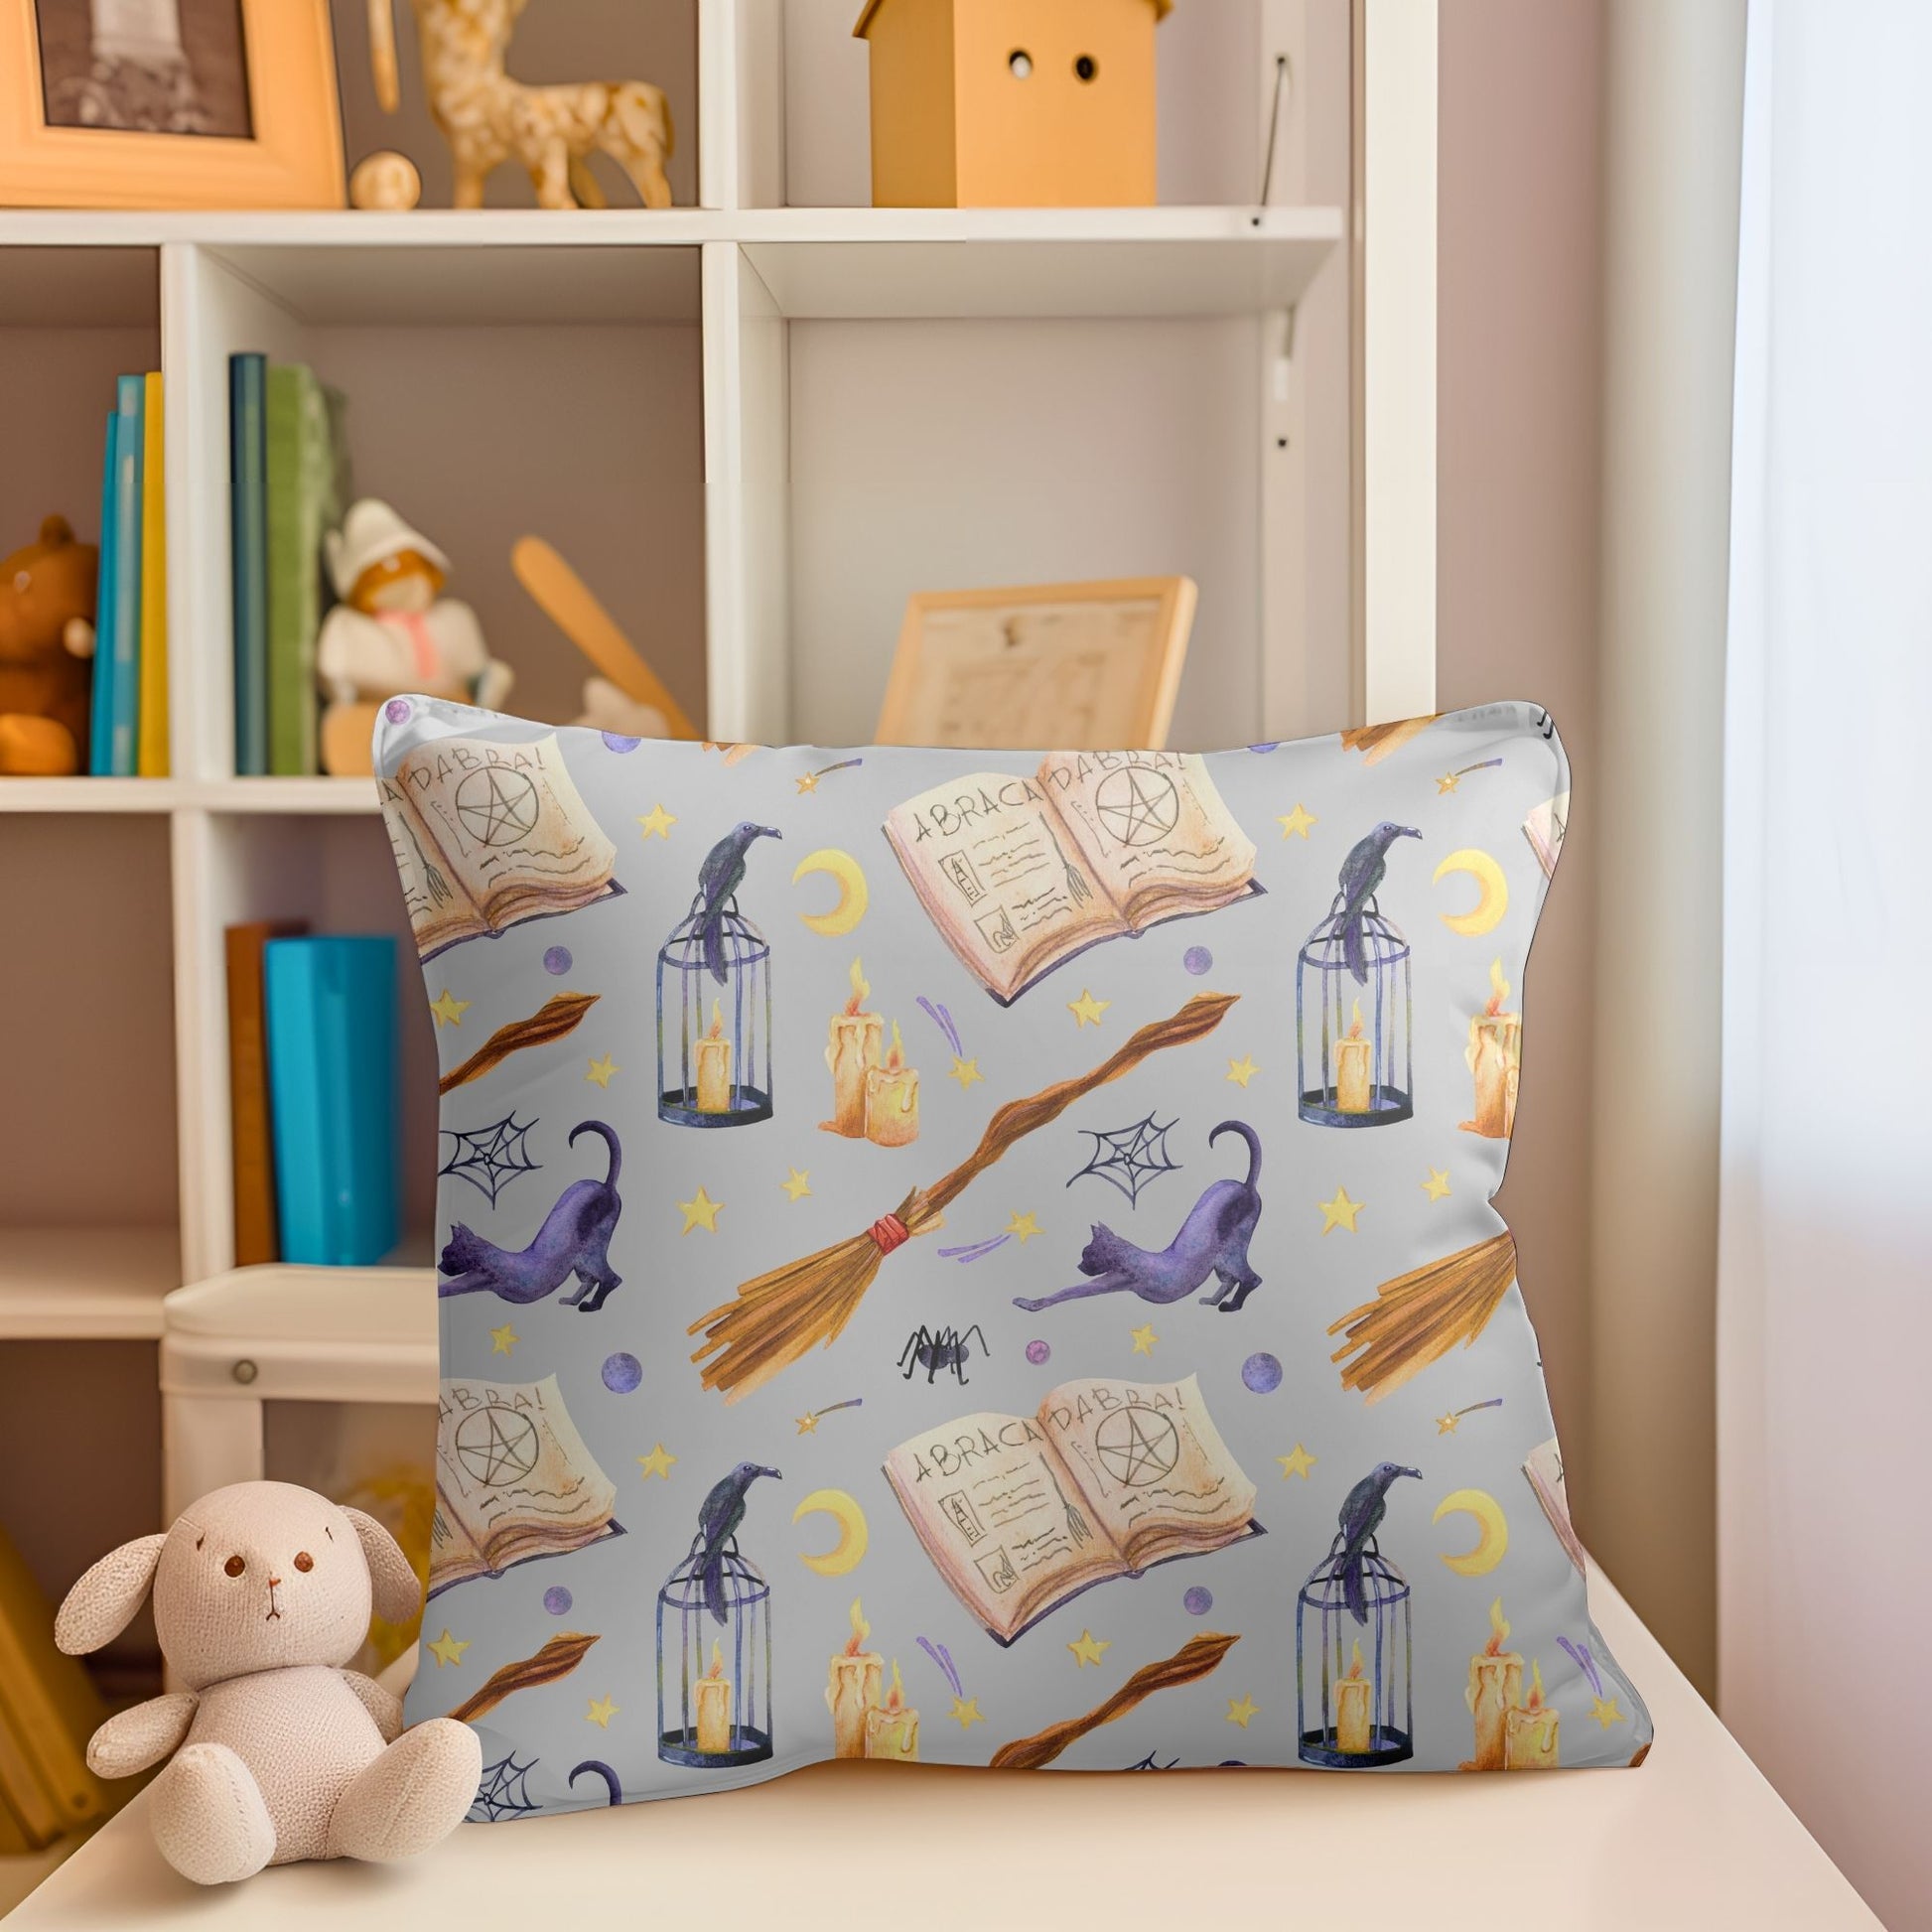 Adorable wizarding patterned pillow to add a touch of magic to kids' bedrooms.